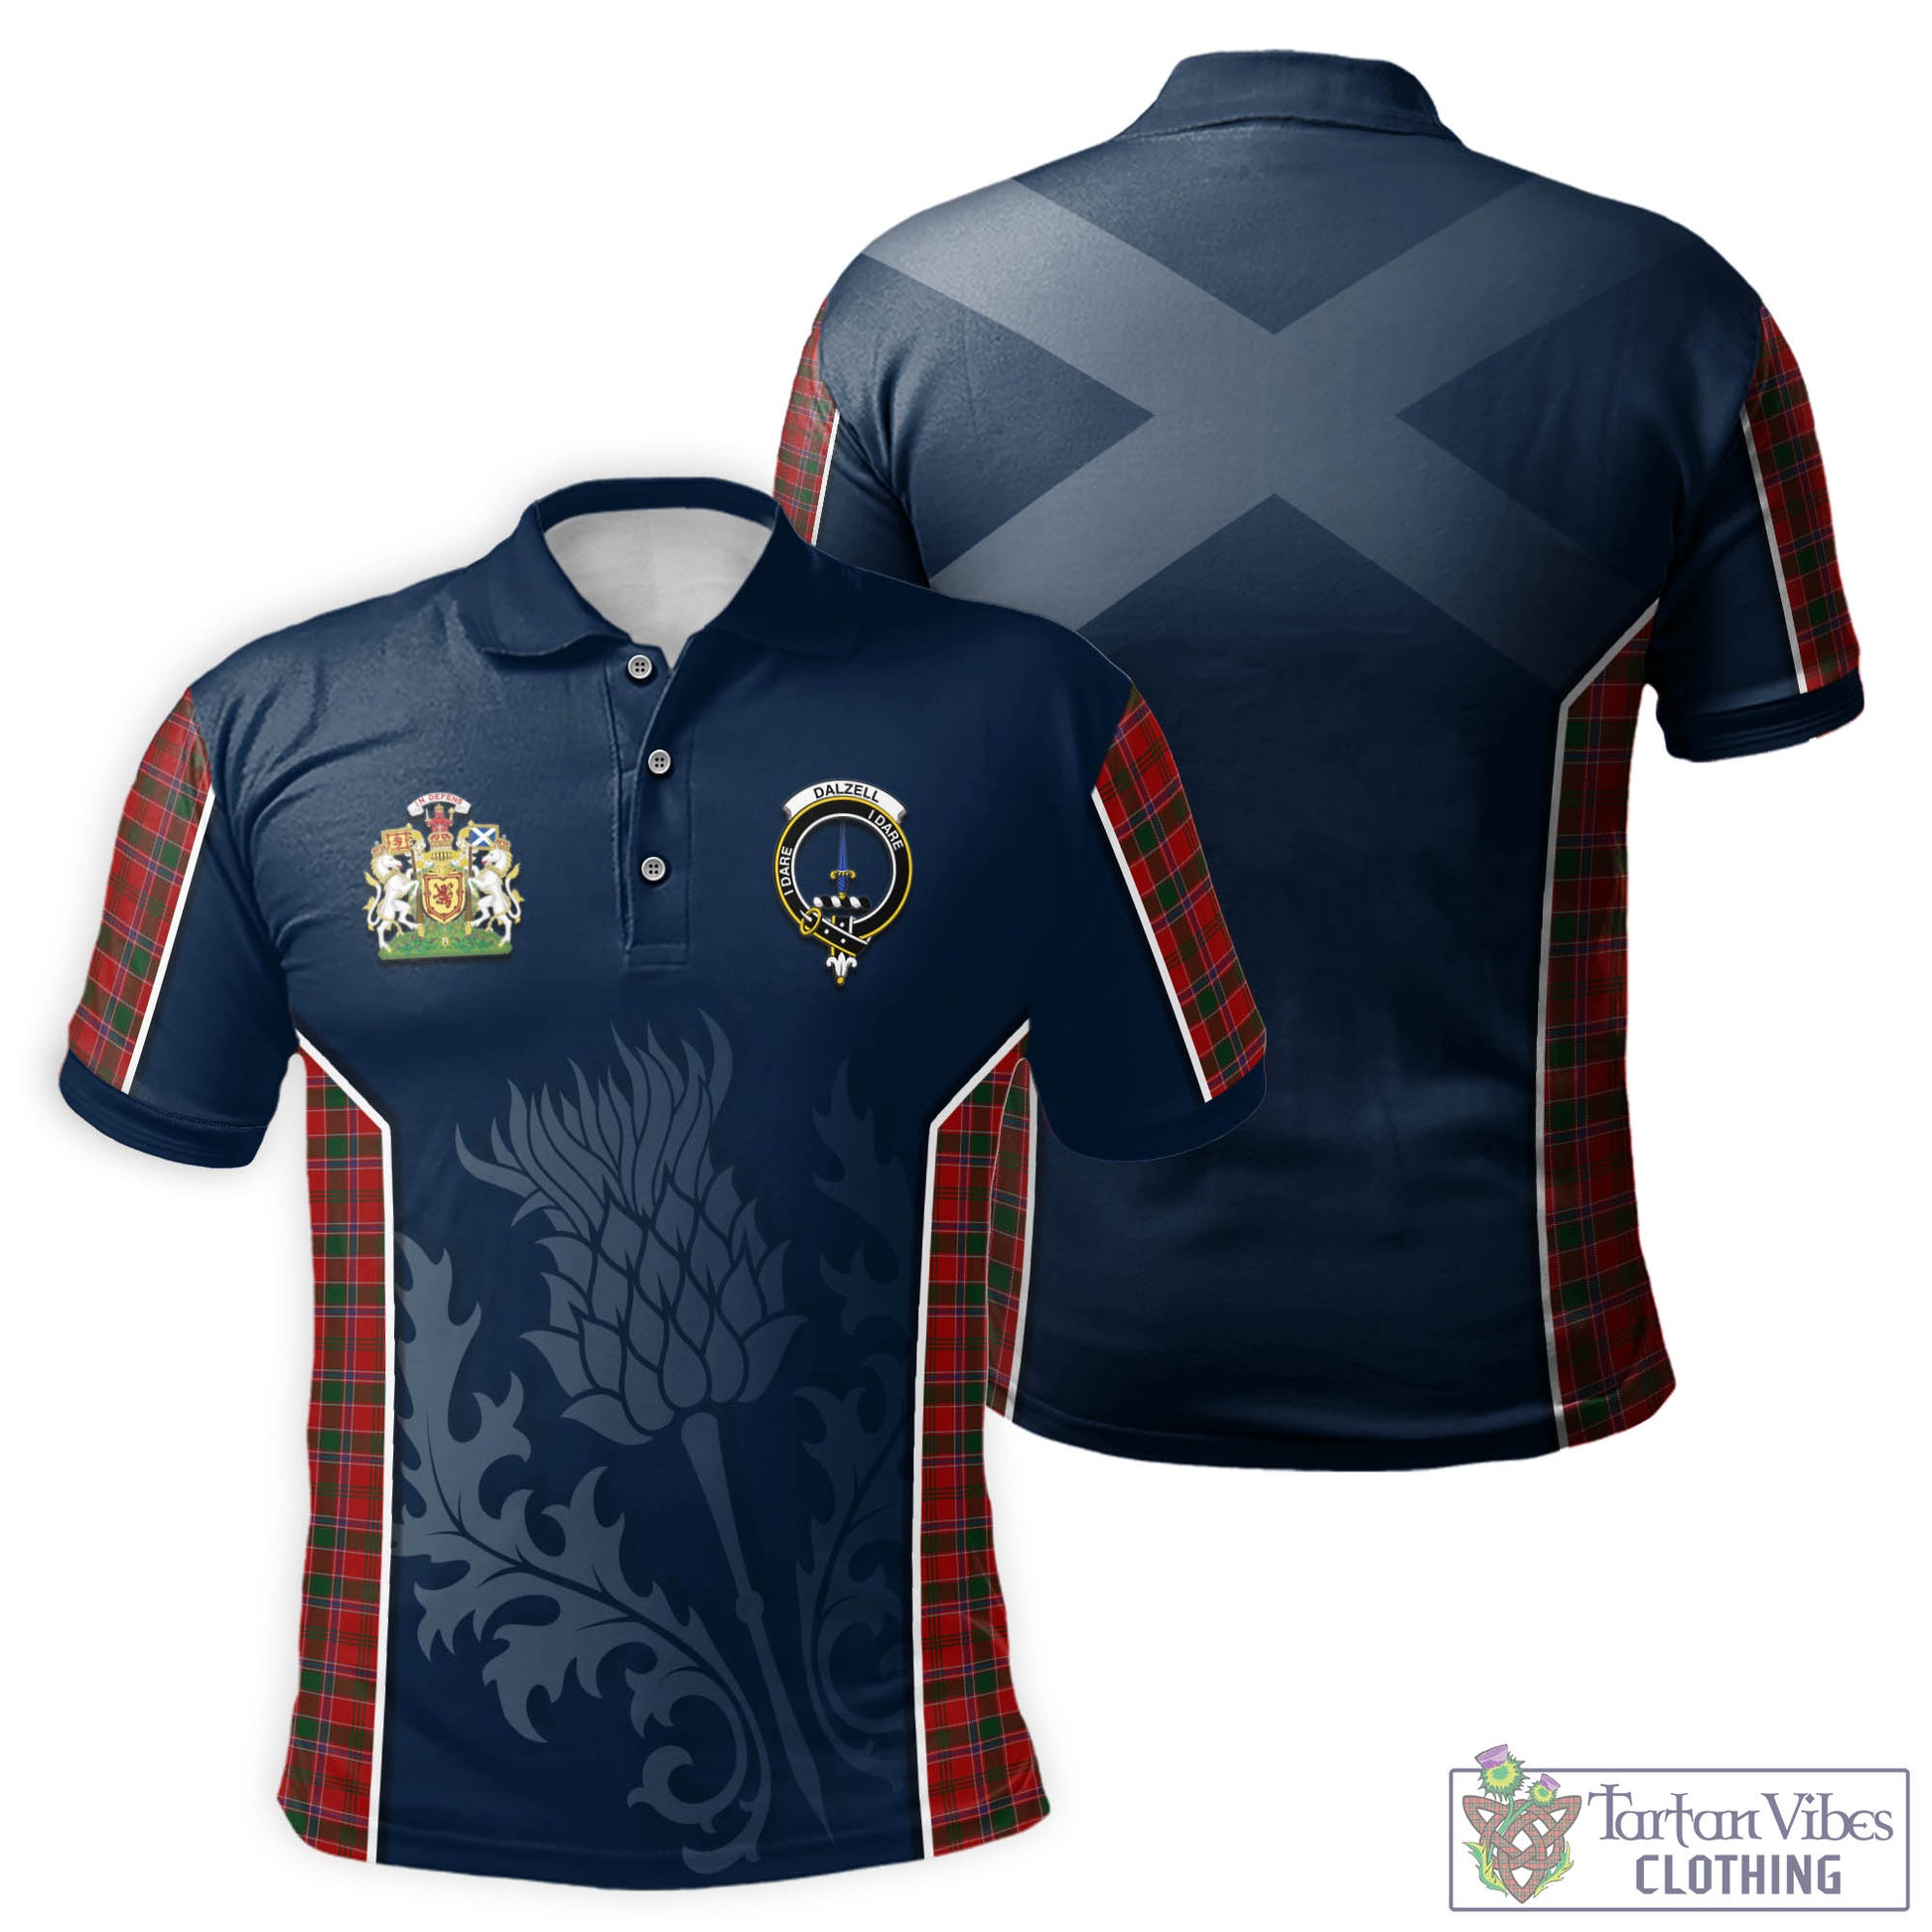 Tartan Vibes Clothing Dalzell (Dalziel) Tartan Men's Polo Shirt with Family Crest and Scottish Thistle Vibes Sport Style